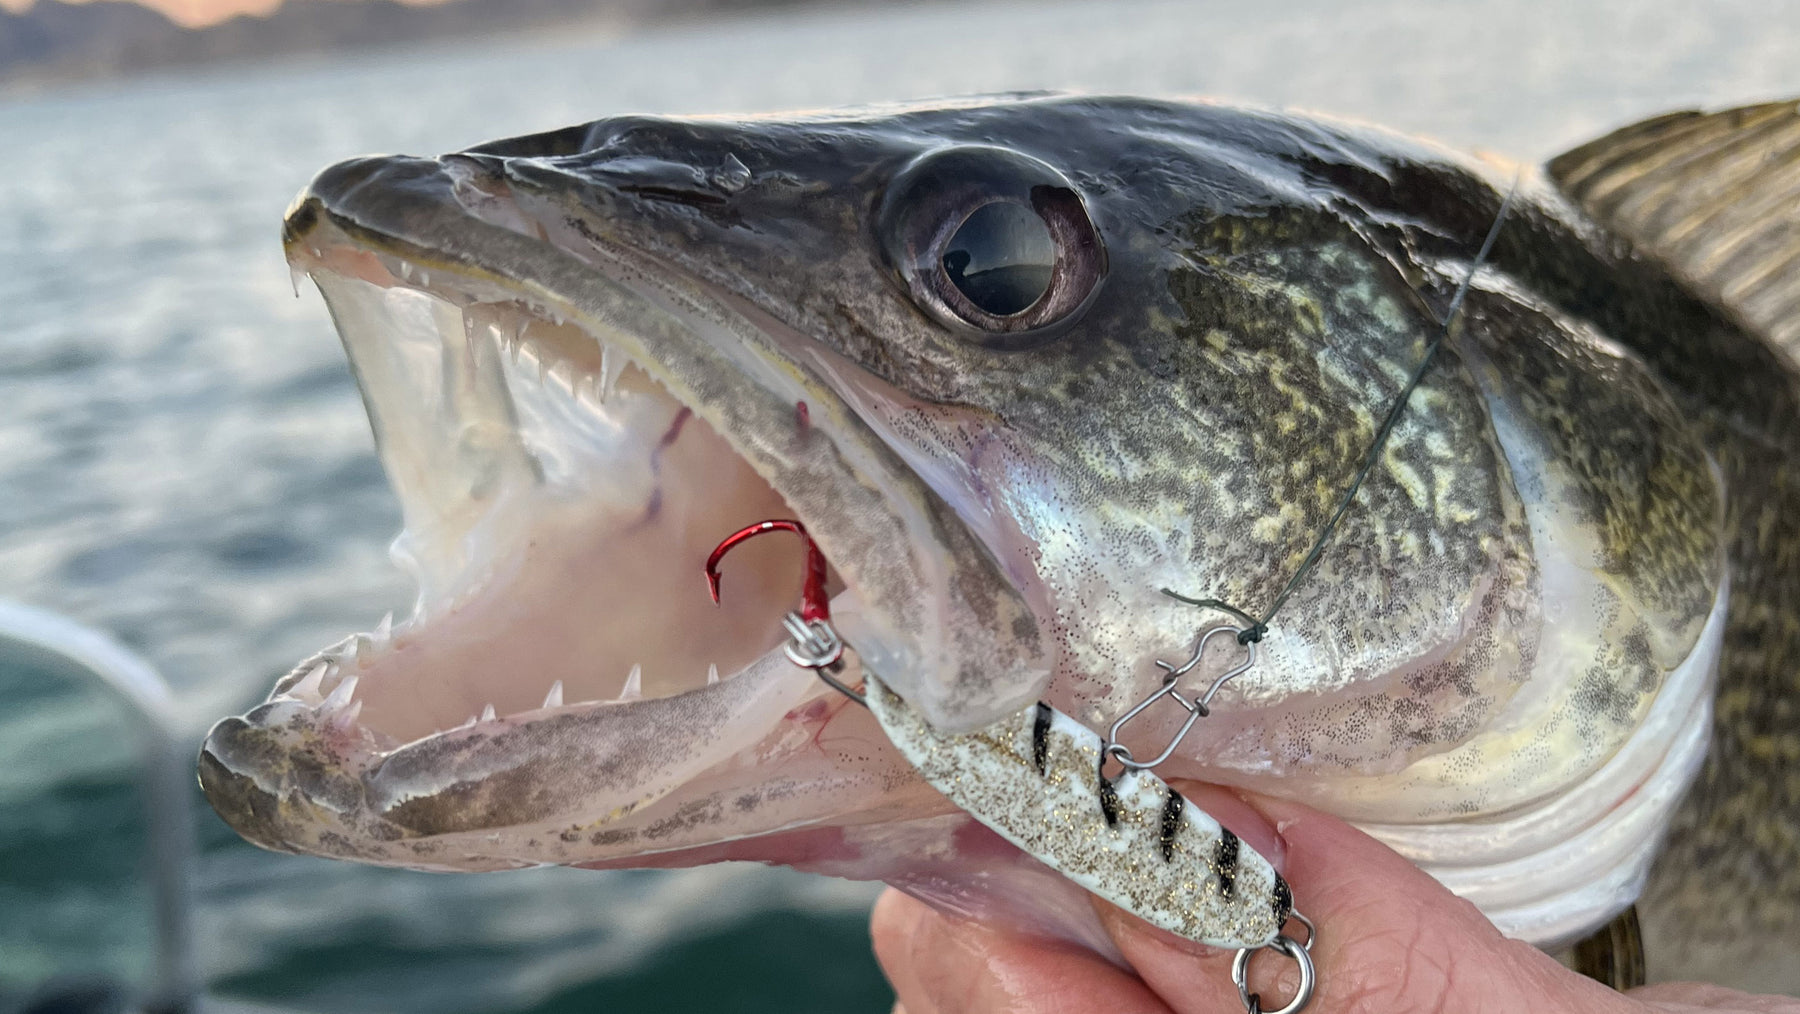 Rosko: Navigating Rocky, Snaggy Structure with "Micro" Sonic BaitFish